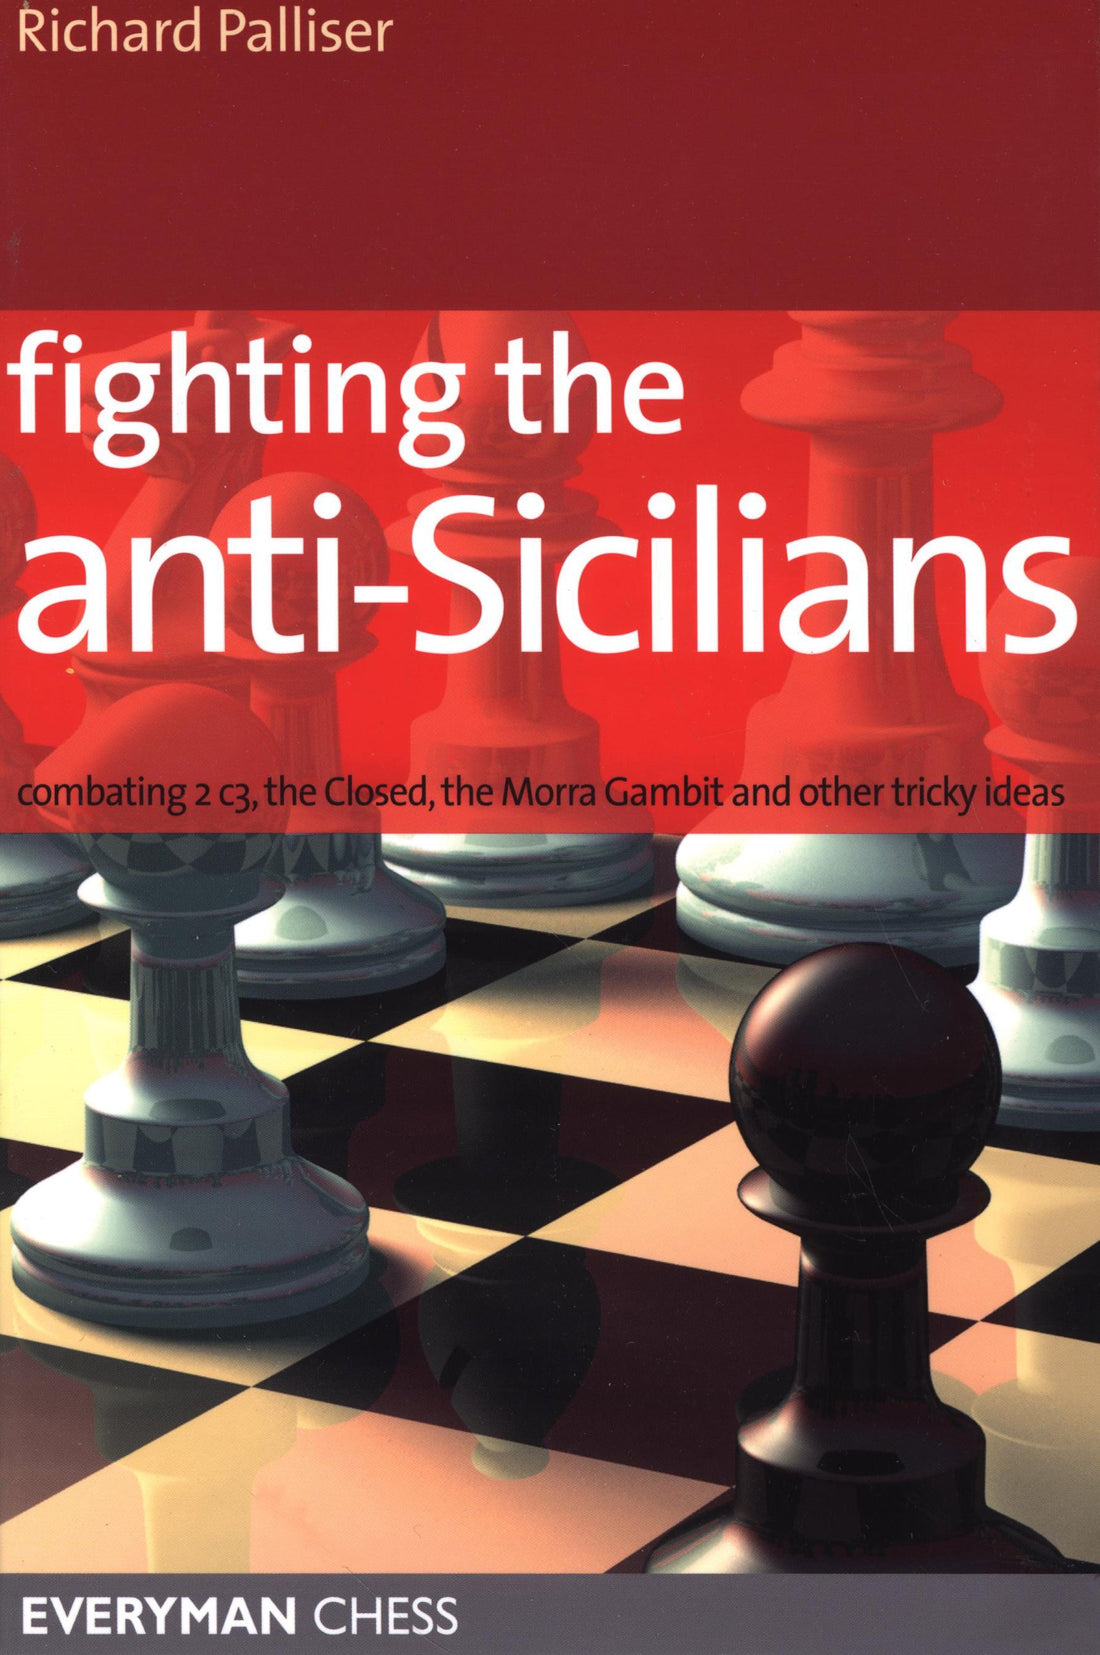 Chess Sicilian Defense: How To Play Variations & Responses